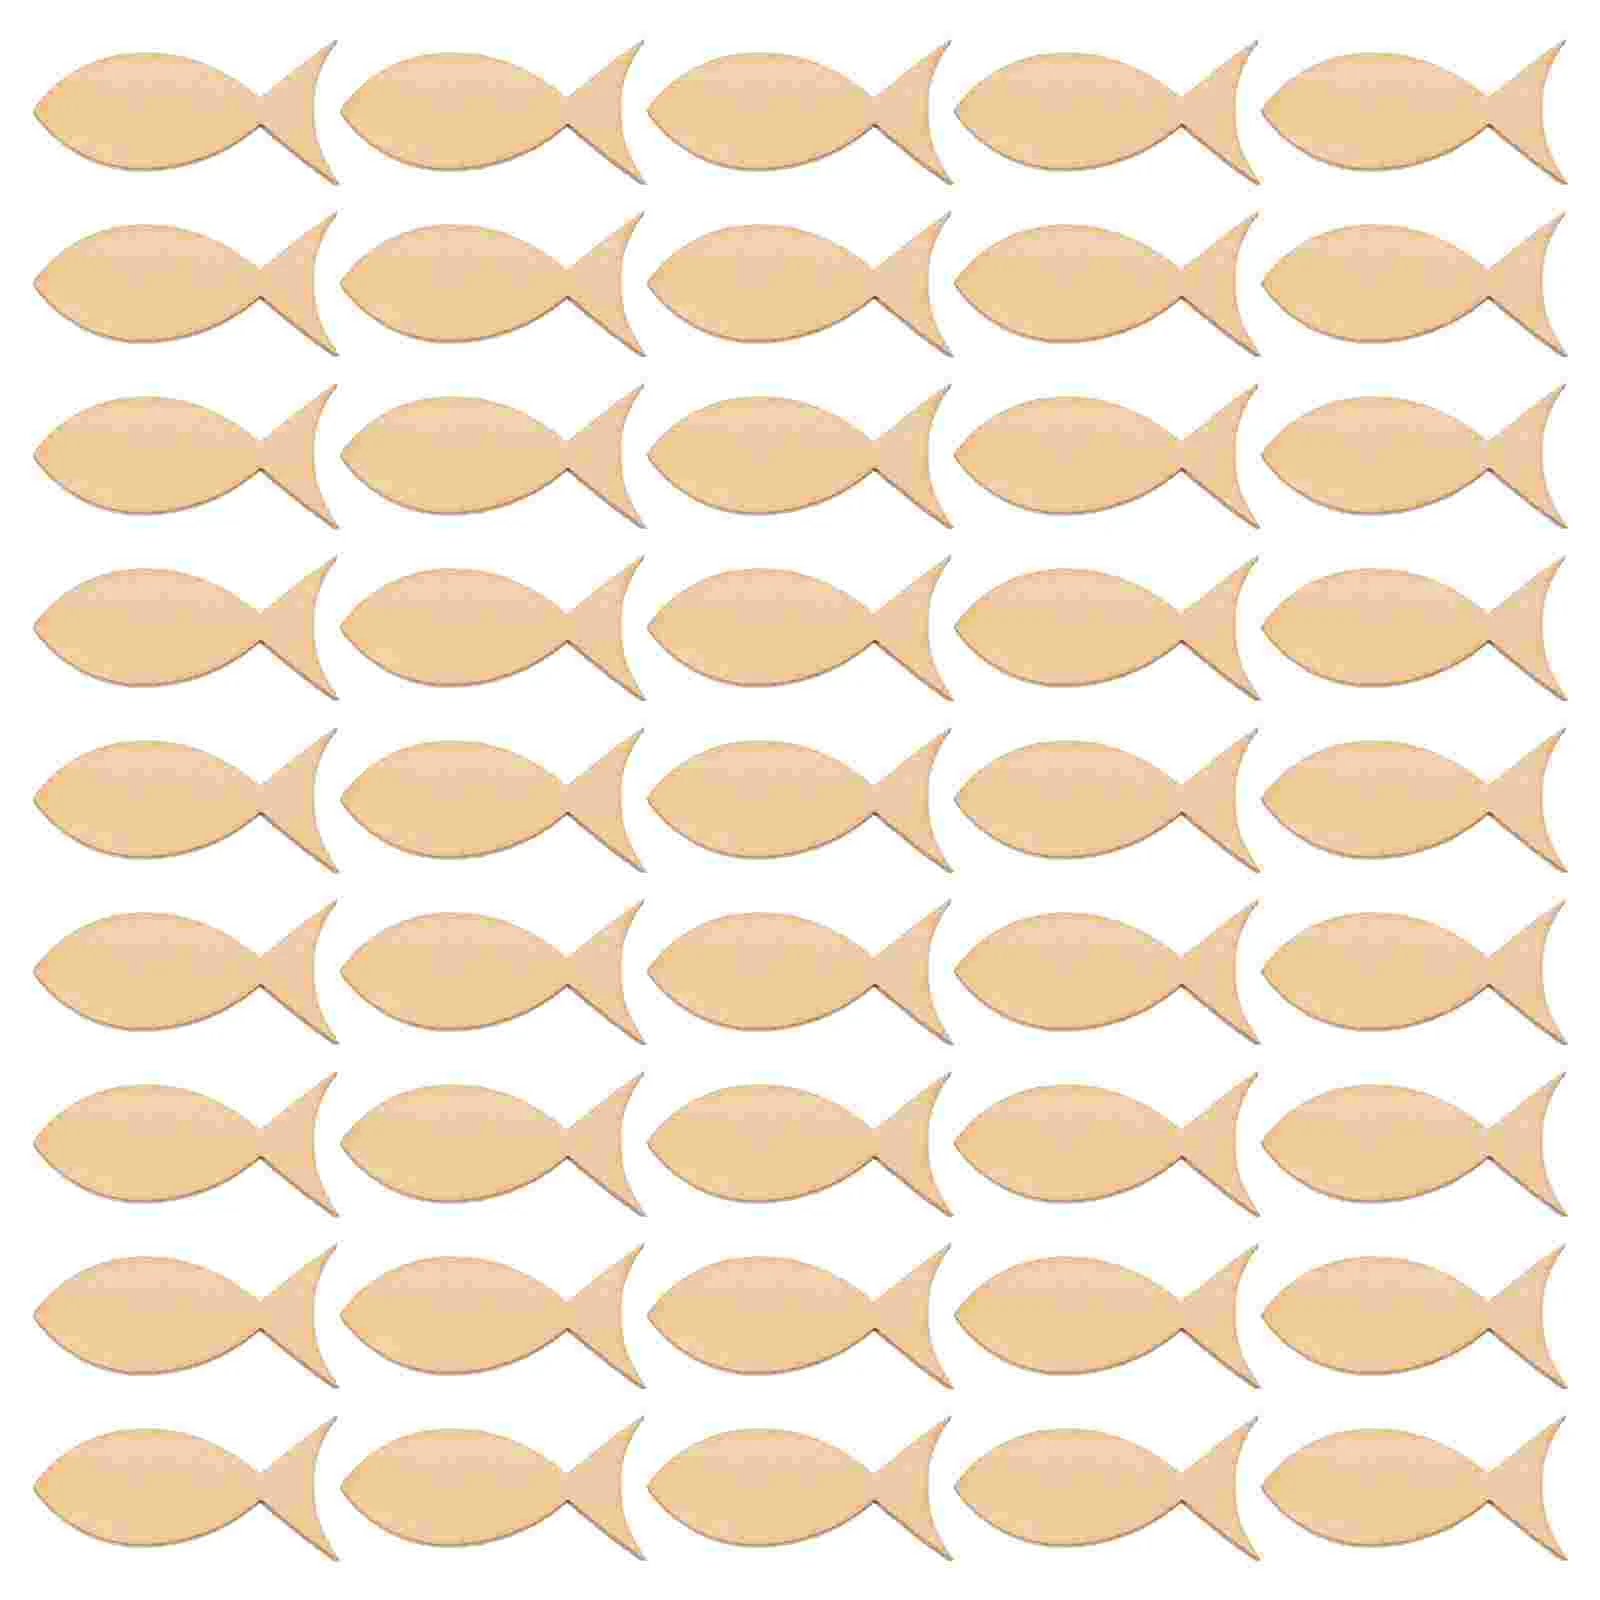 

100 Pcs DIY Wood Chips Kids Crafts Woody Toy Nautical Cutouts Trim Blank Fish Unfinished Wooden Slices